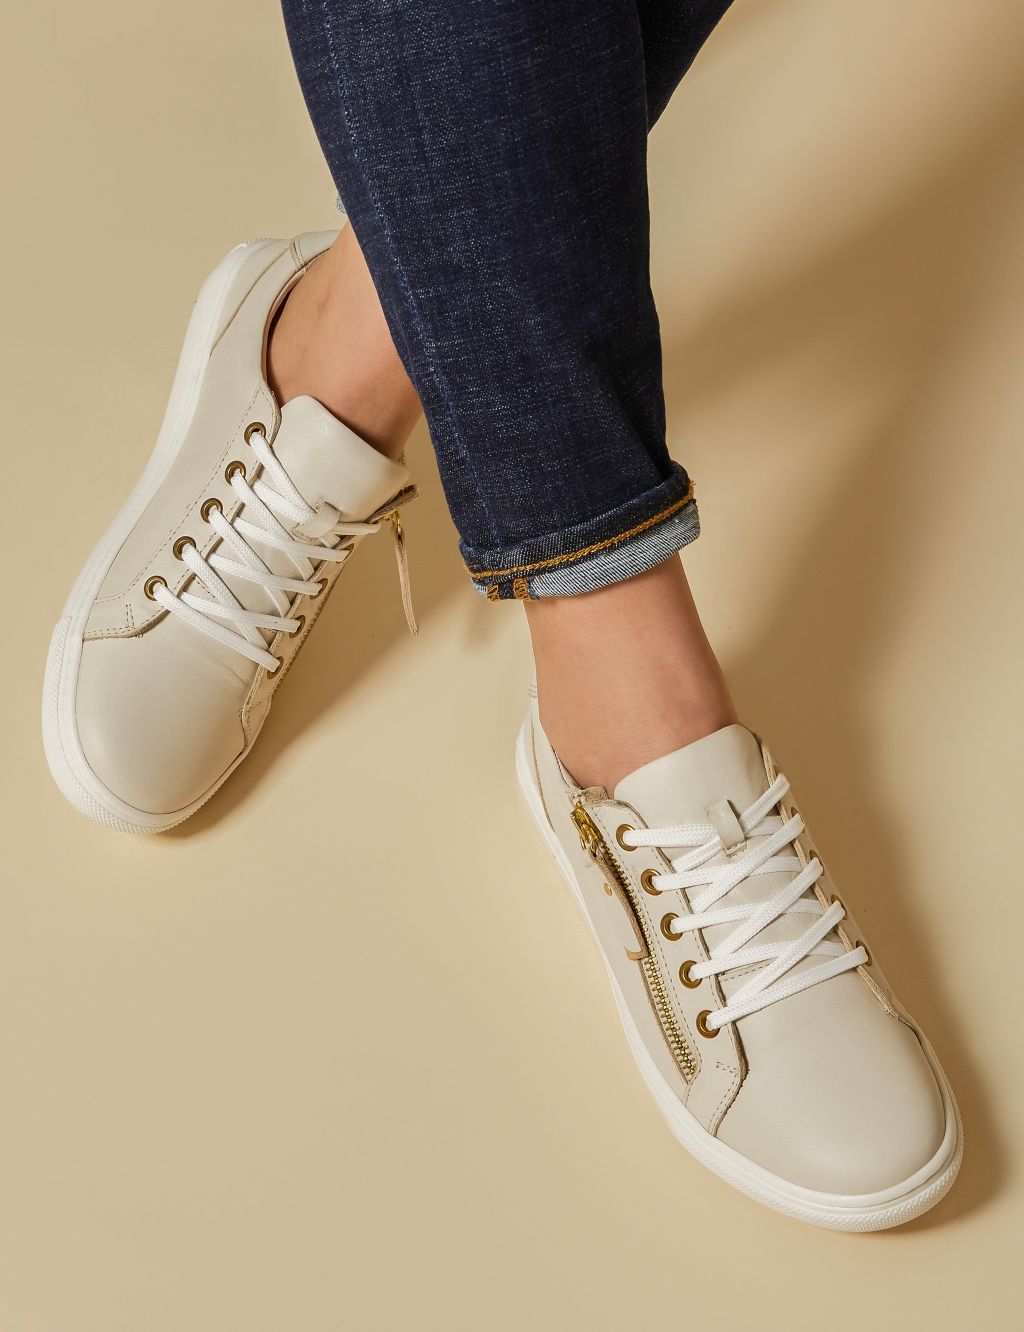 Leather Zip Up Trainers image 1